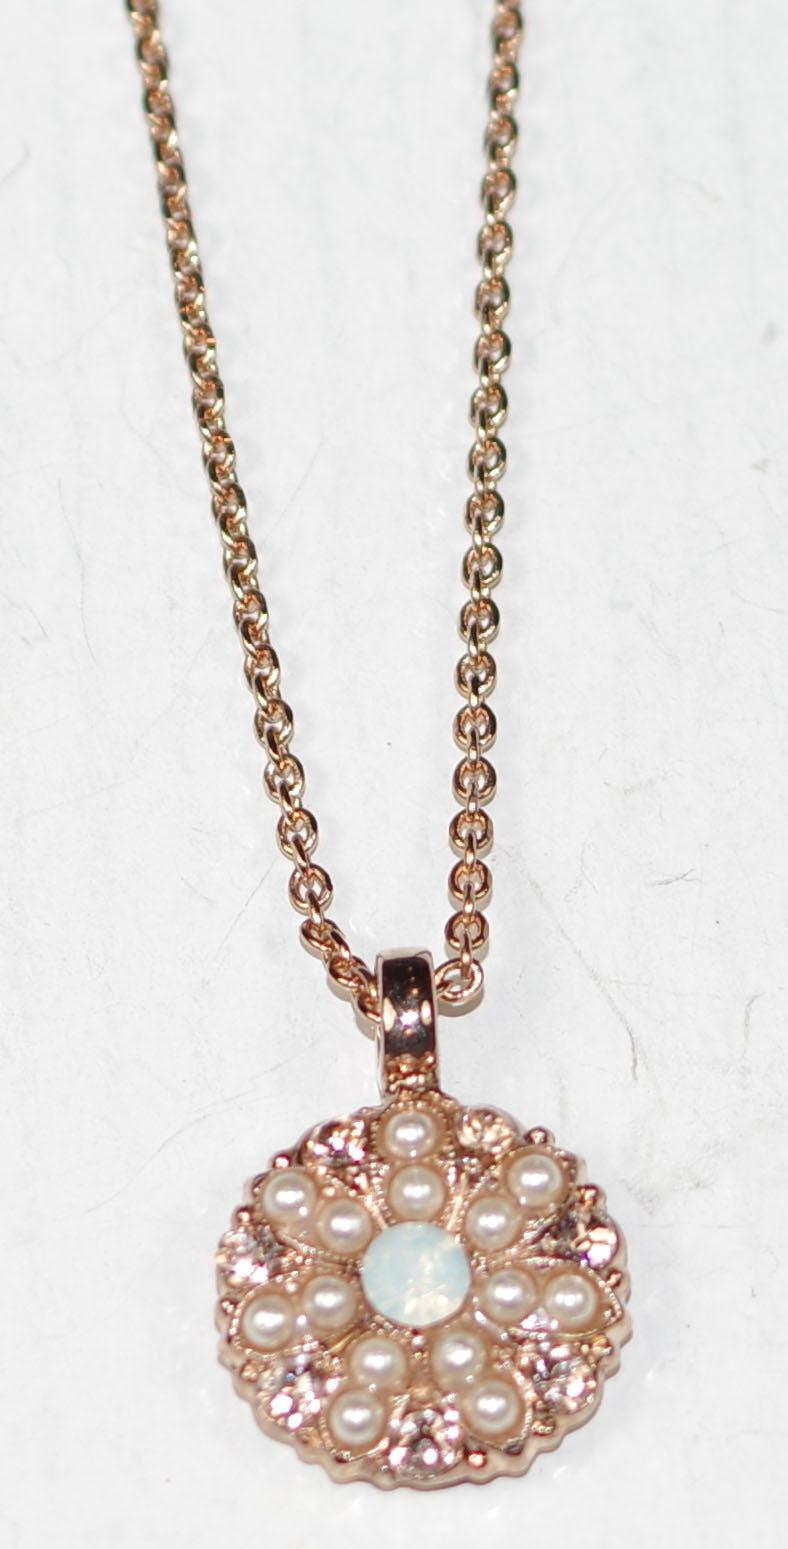 MARIANA ANGEL PENDANT COOKIE DOUGH: amber, white, pearl stones in rose gold setting, 18" adjustable chain